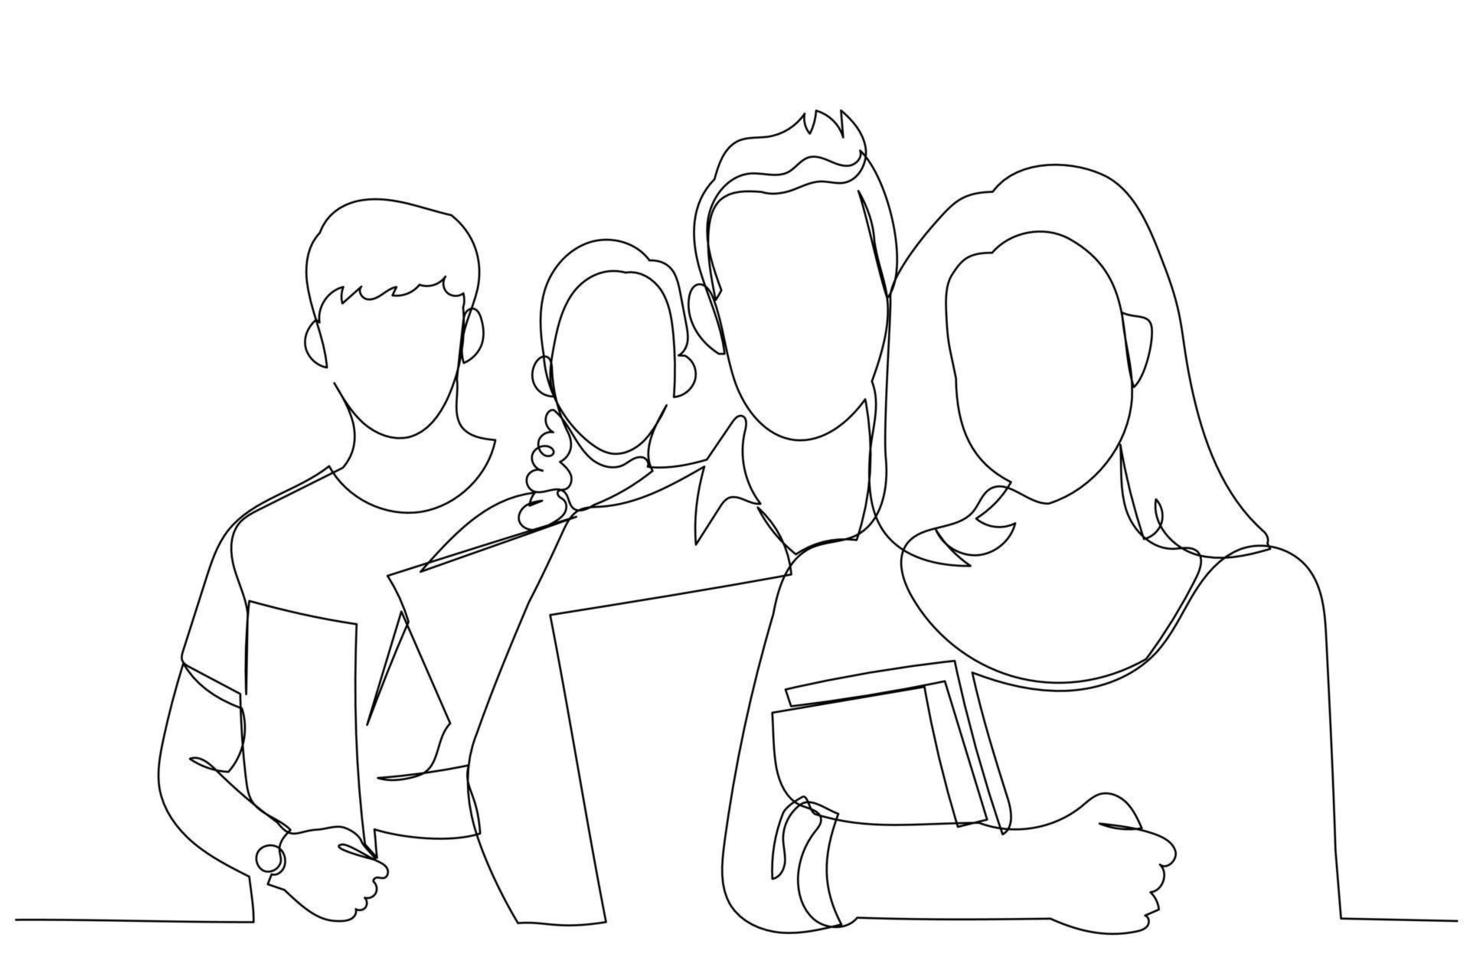 Cartoon of closeup of university students standing in a row with books. One line art style vector